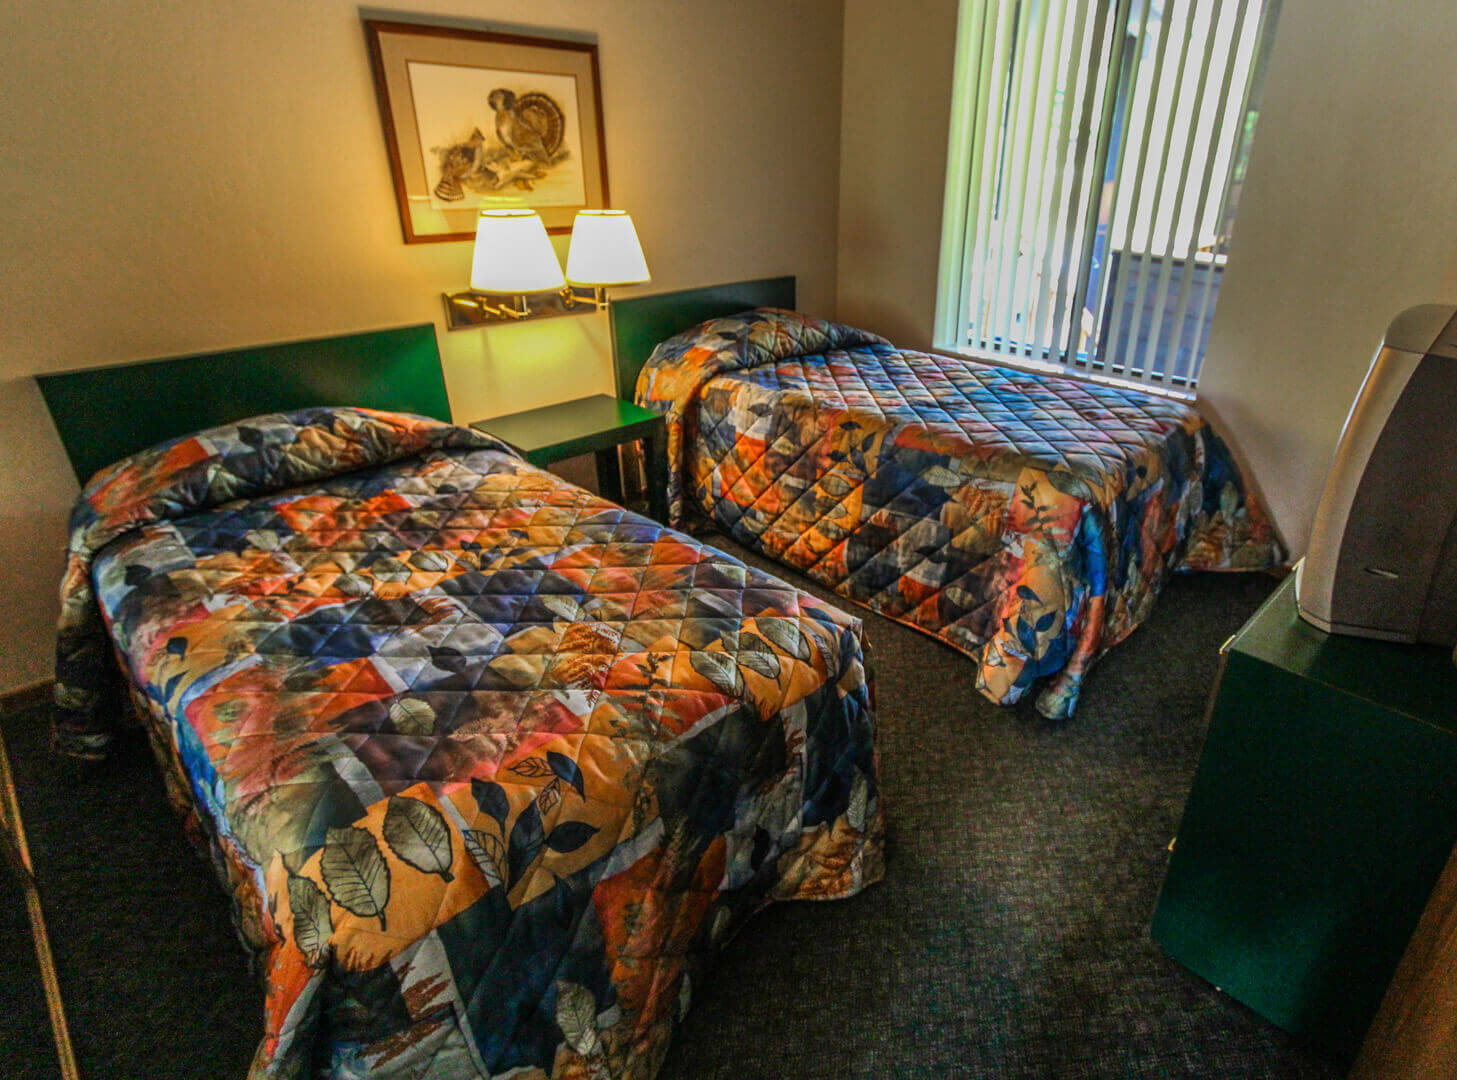 A spacious bedroom with double beds at VRI's Wolf Creek Village I in Eden, Utah.